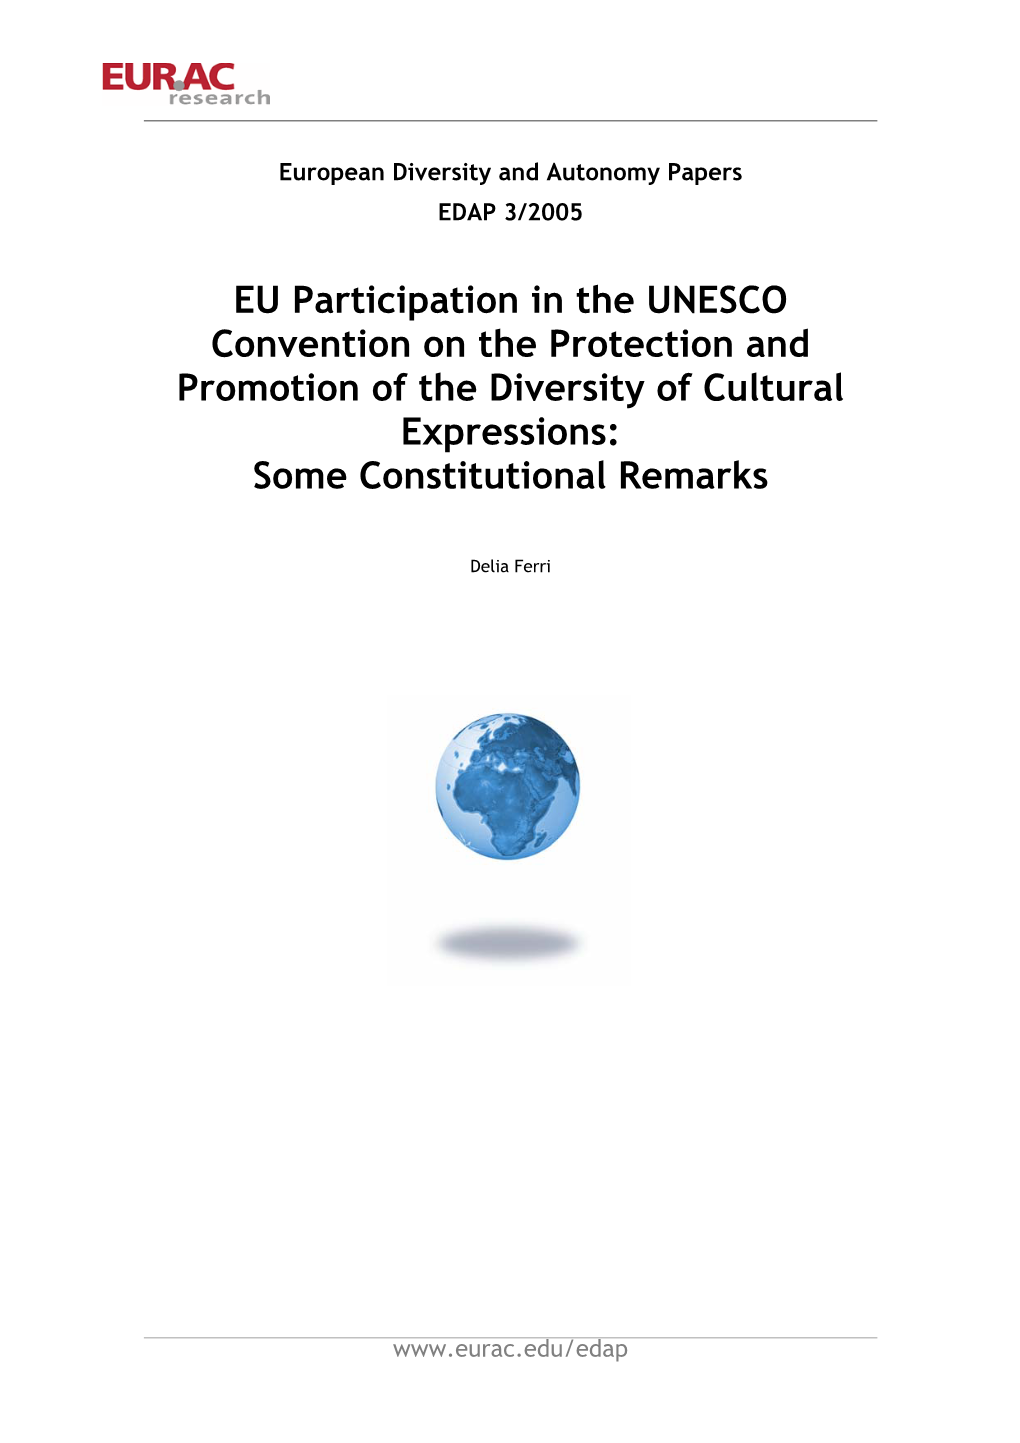 The EU and the UNESCO Convention on Cultural Diversity